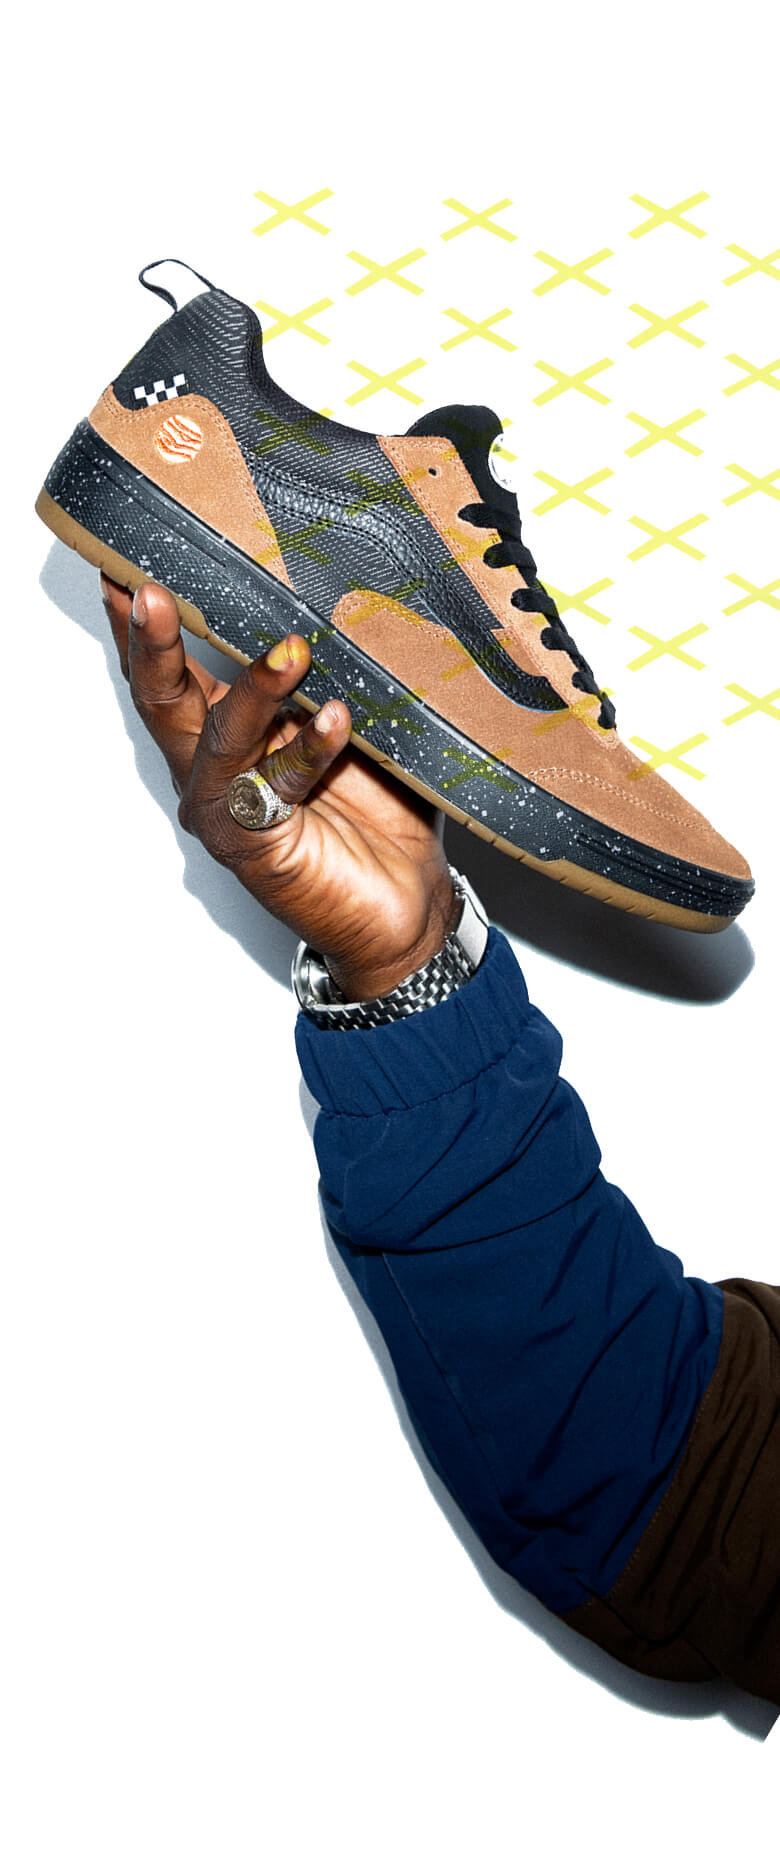 Zion Wright's arm holding the zahba shoe with the Zion colorway overlaid with a yellow repeating x pattern.